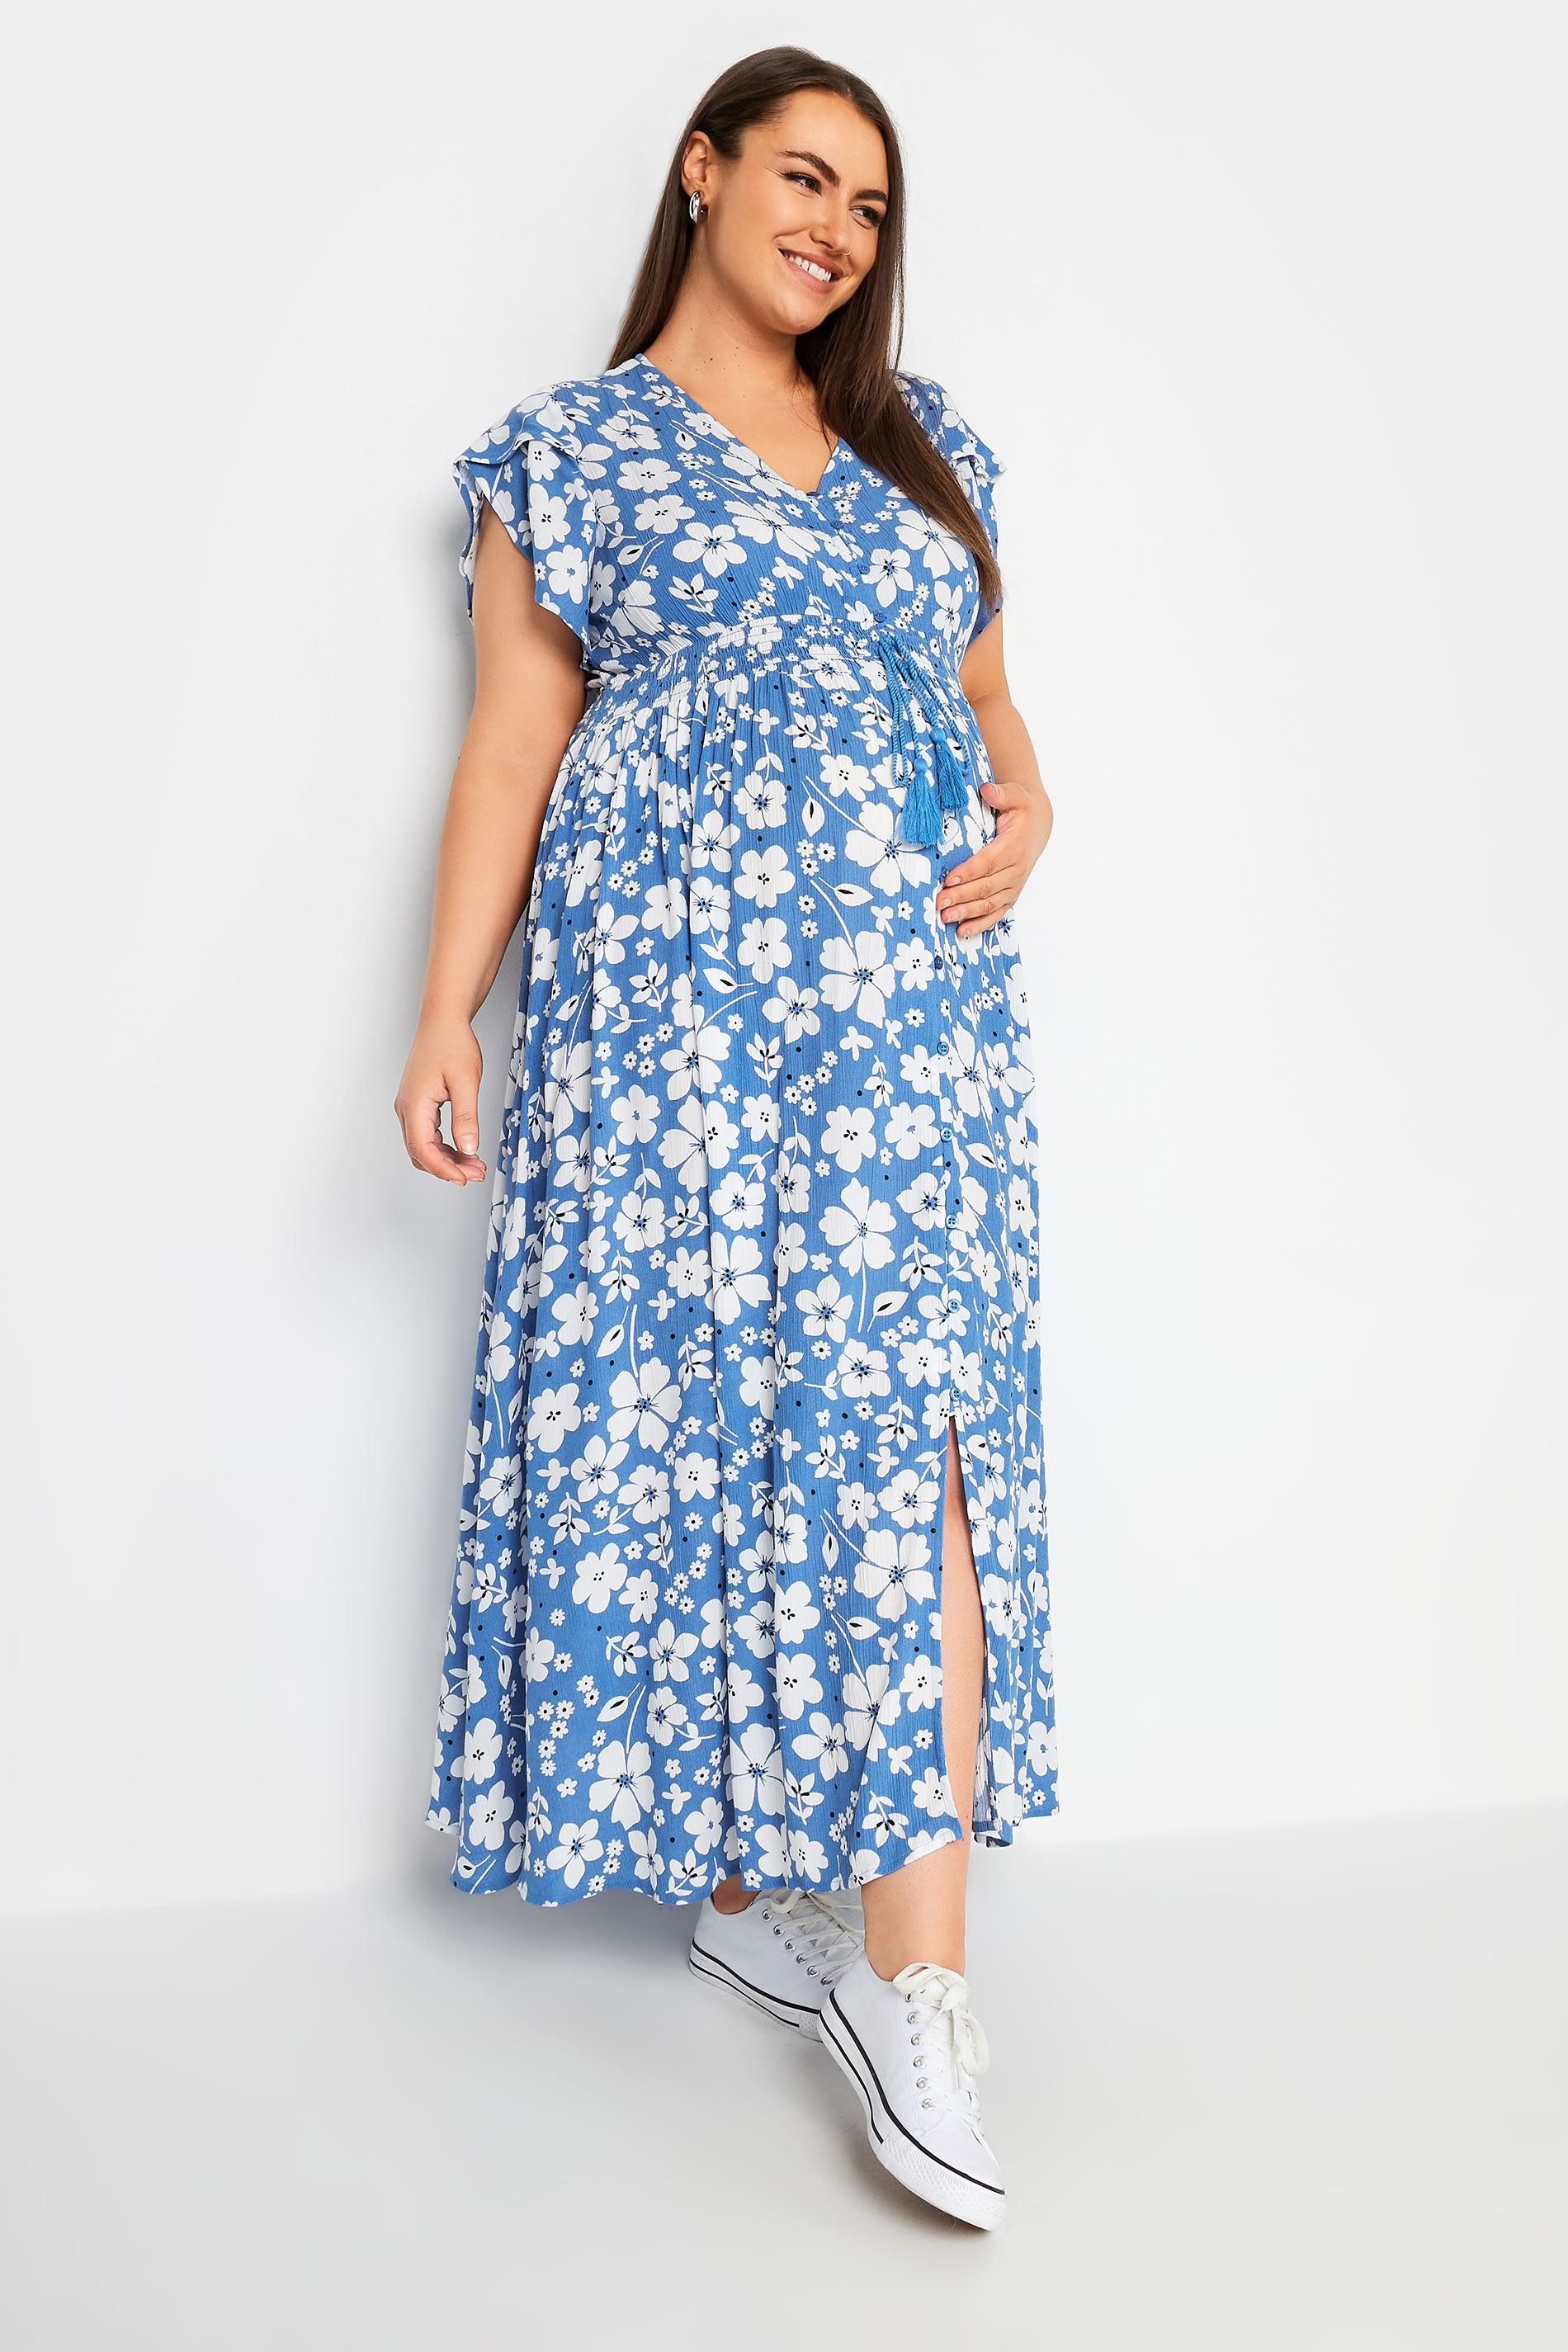 BUMP IT UP MATERNITY Plus Size Blue Floral Print Maxi Dress | Yours Clothing 1